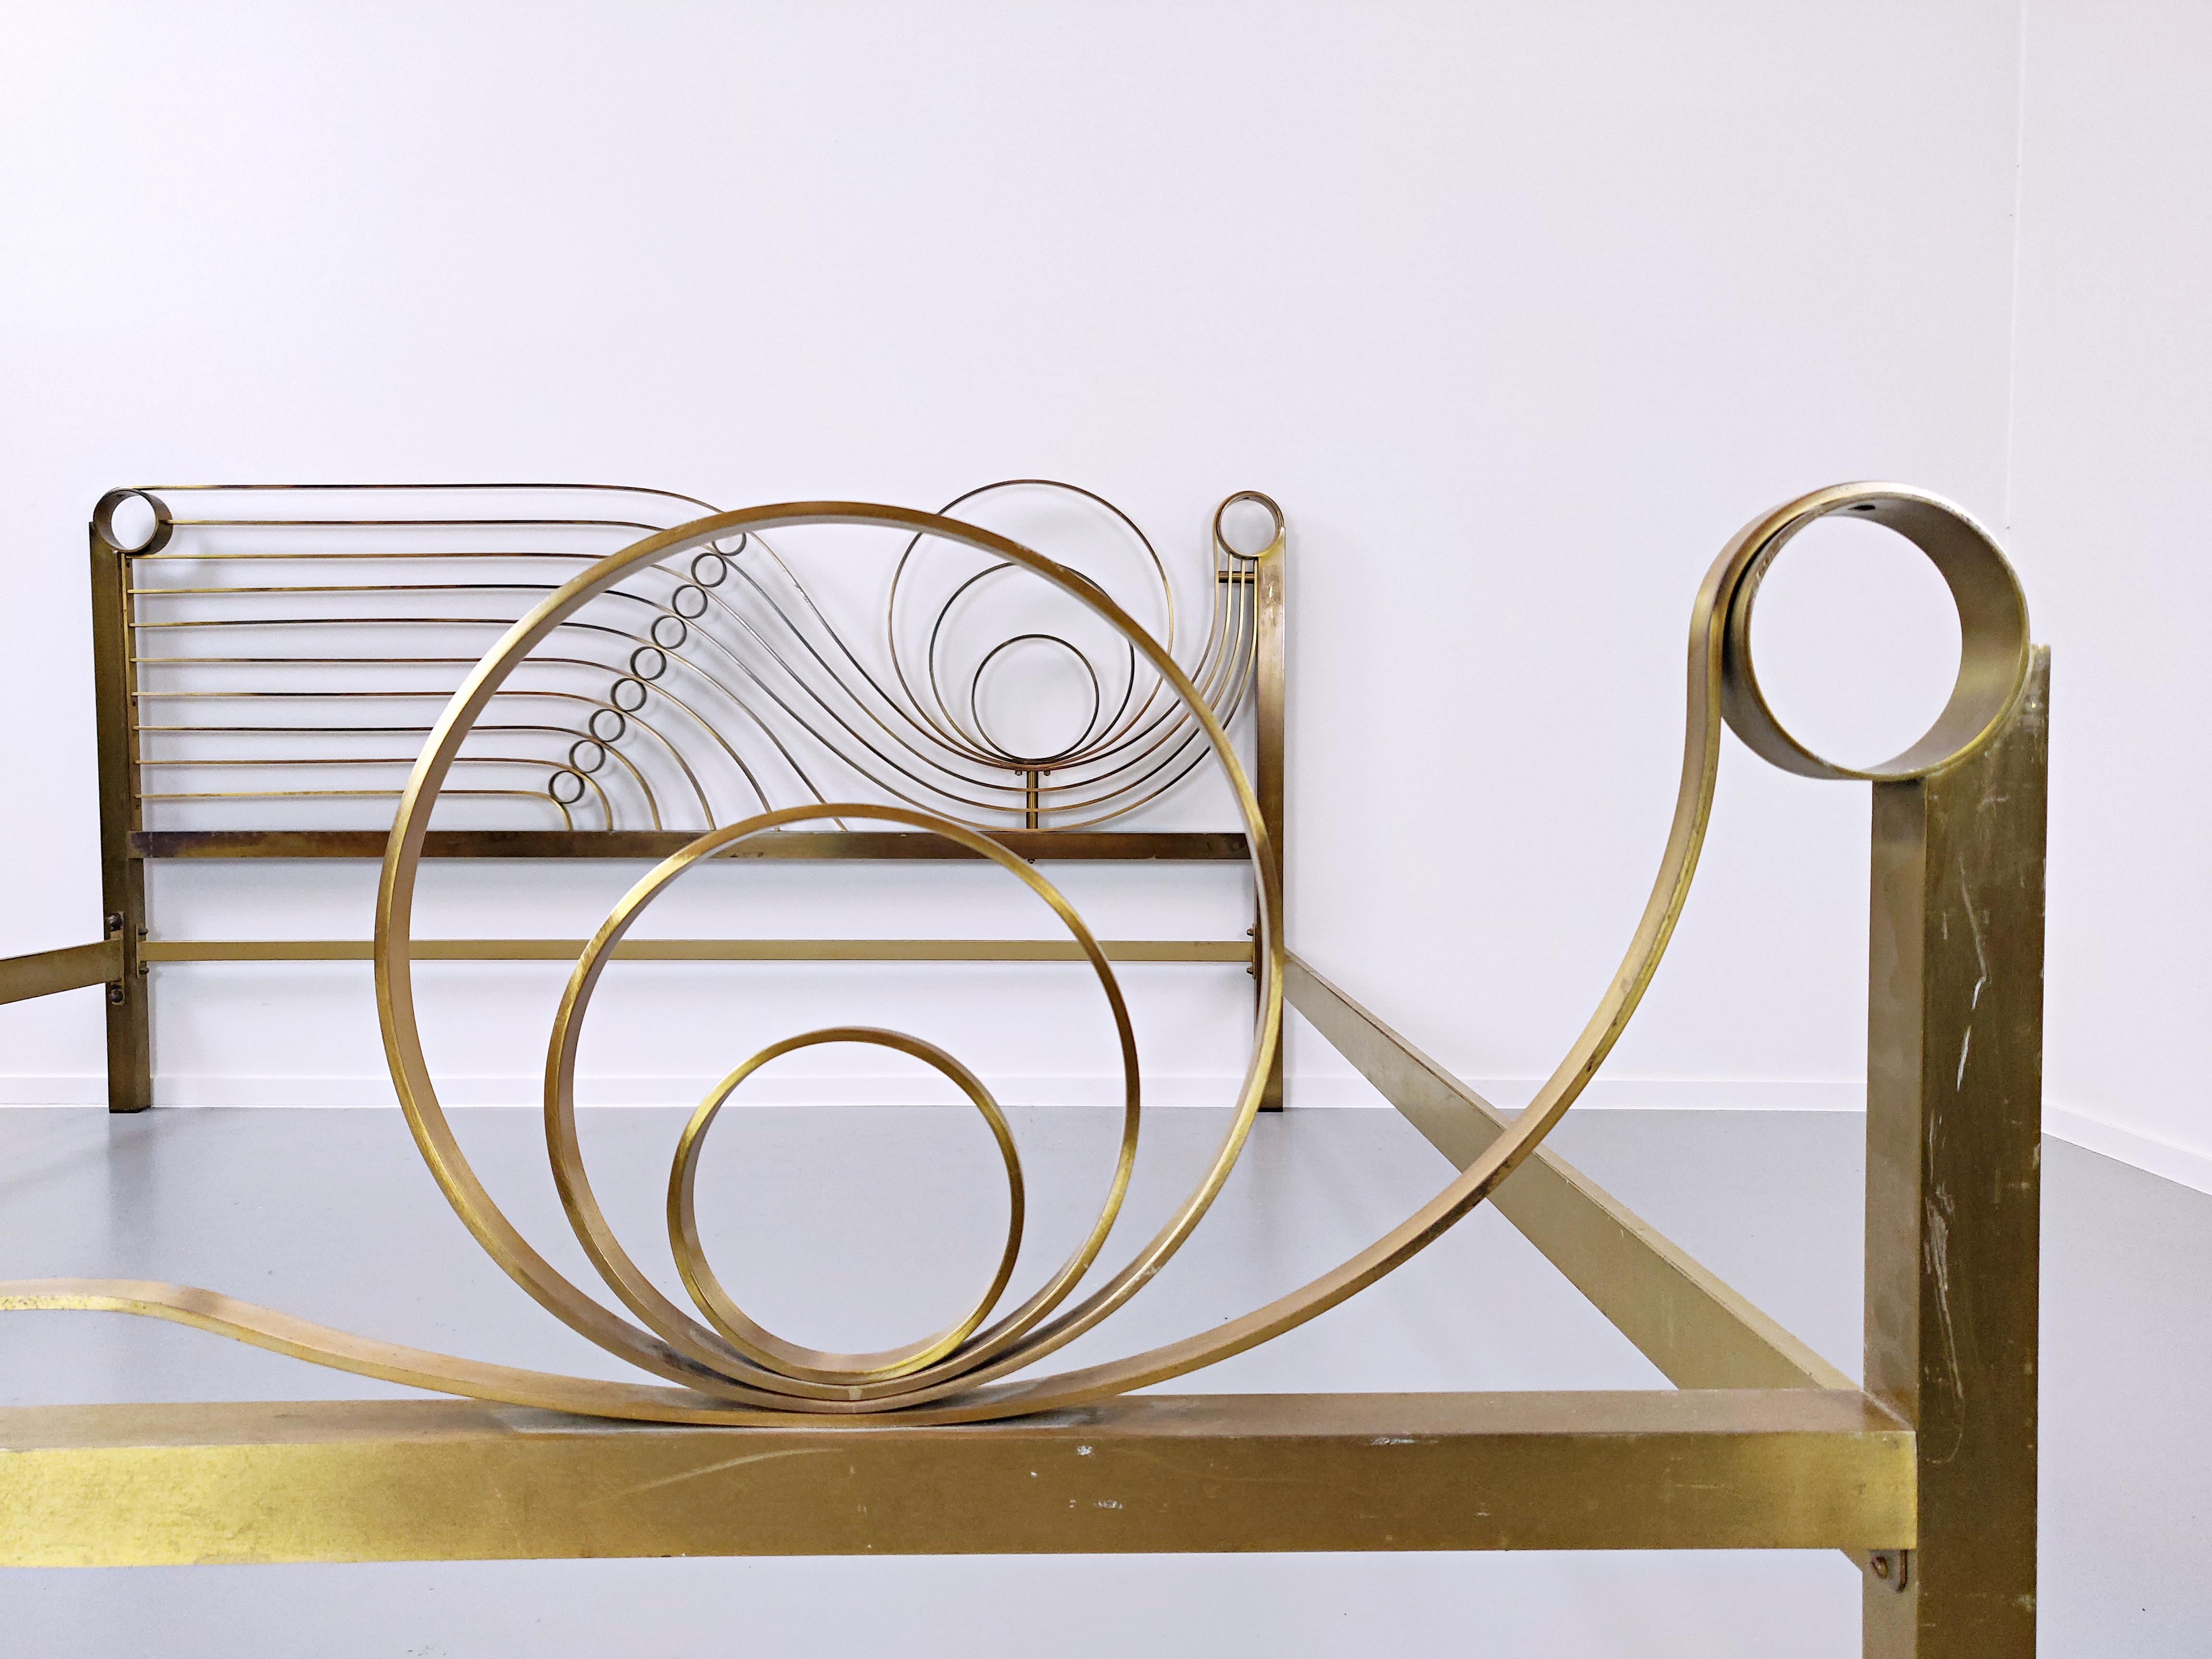 Brass bed by Luciano Frigerio, 1970s.